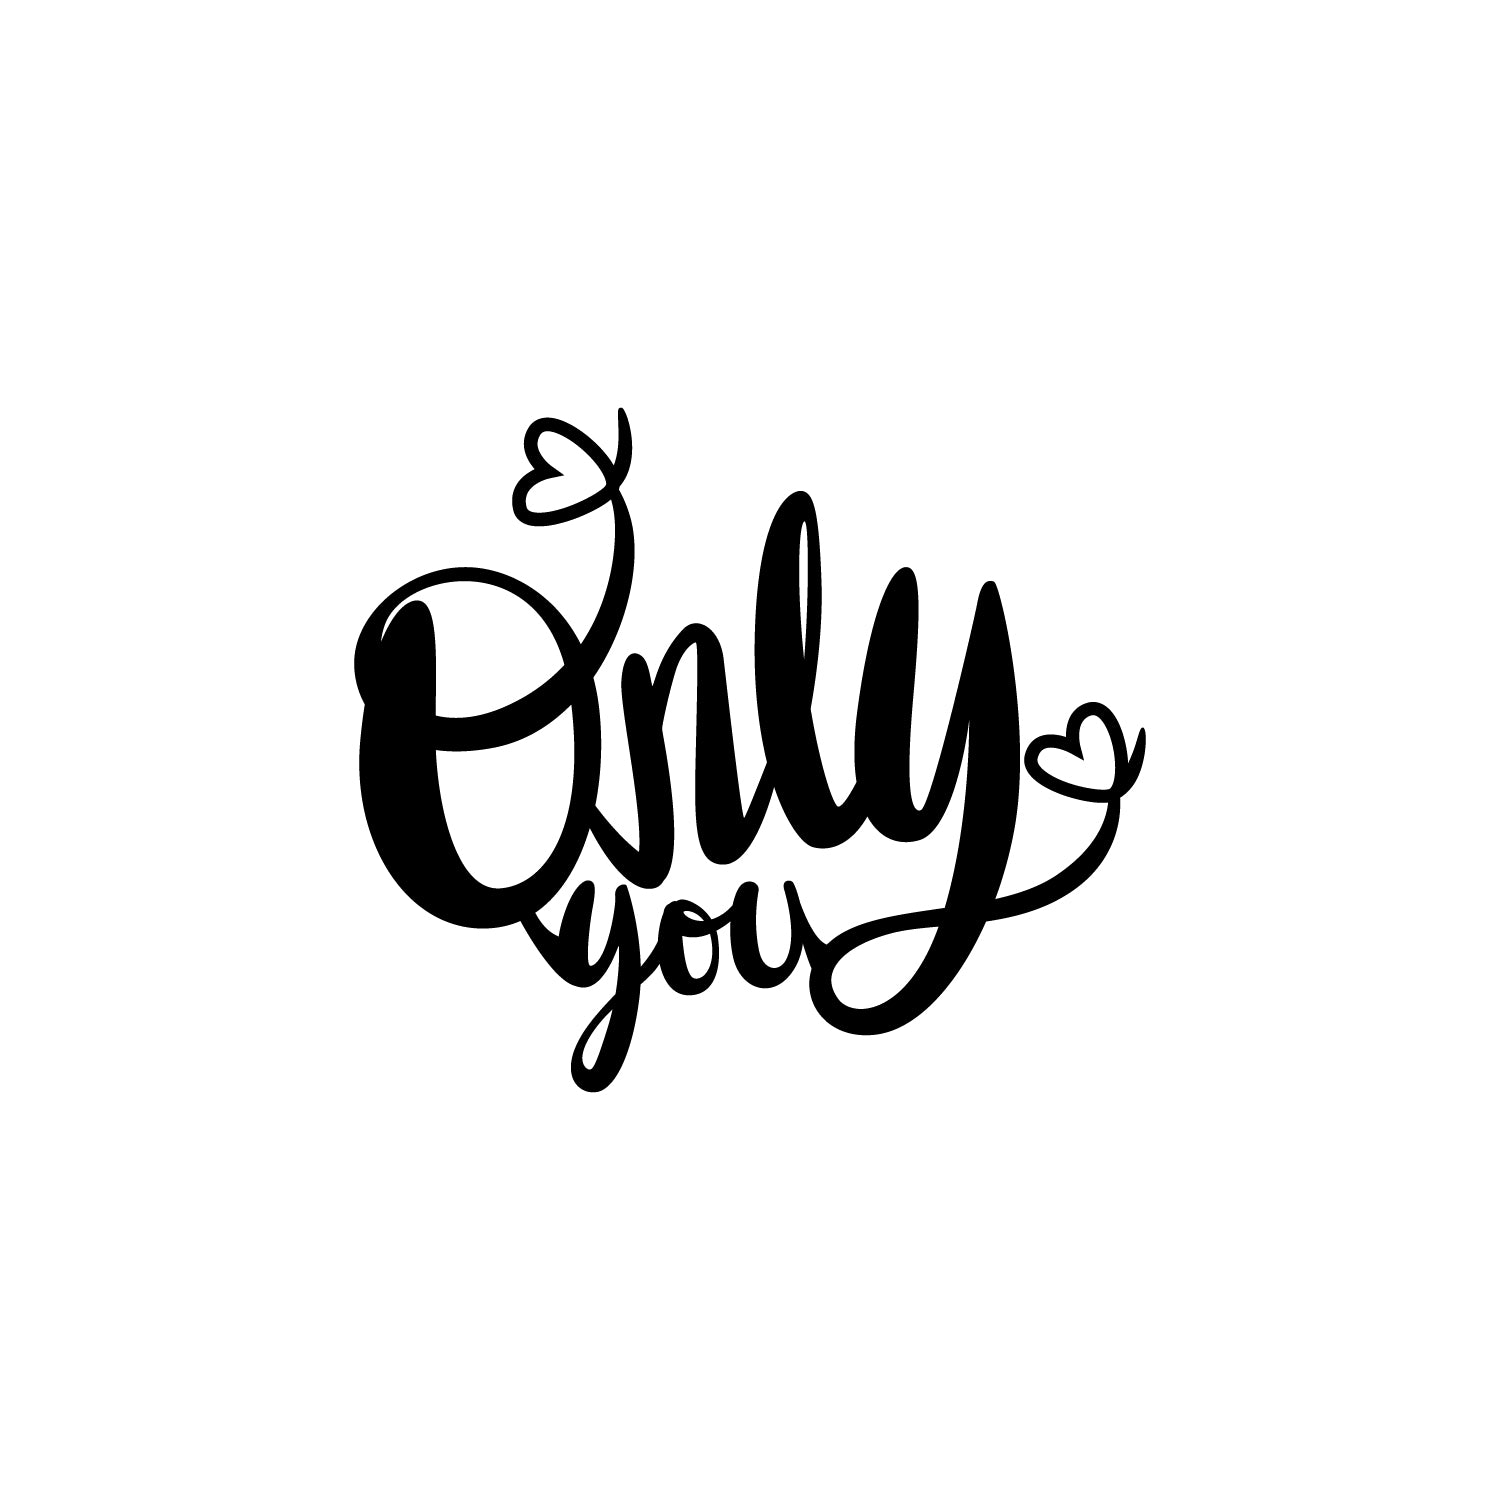 "Only You" Love Theme Black Engineered Wood Wall Art Cutout, Ready to Hang Home Decor 2